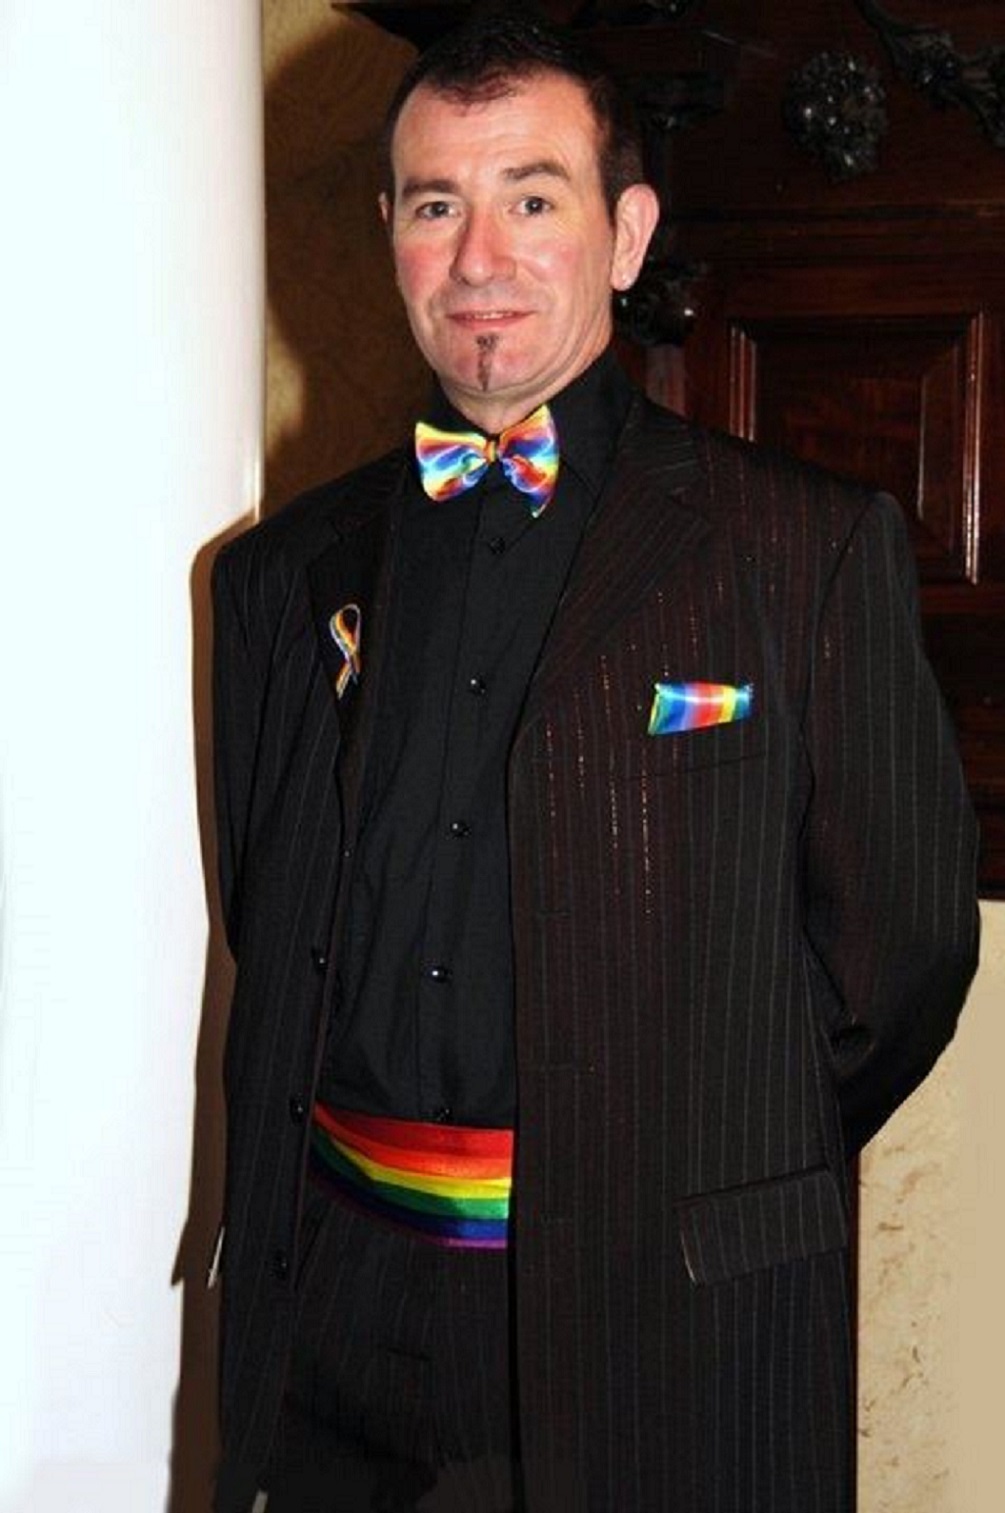 Taken a couple of years ago at a Rainbow Ball